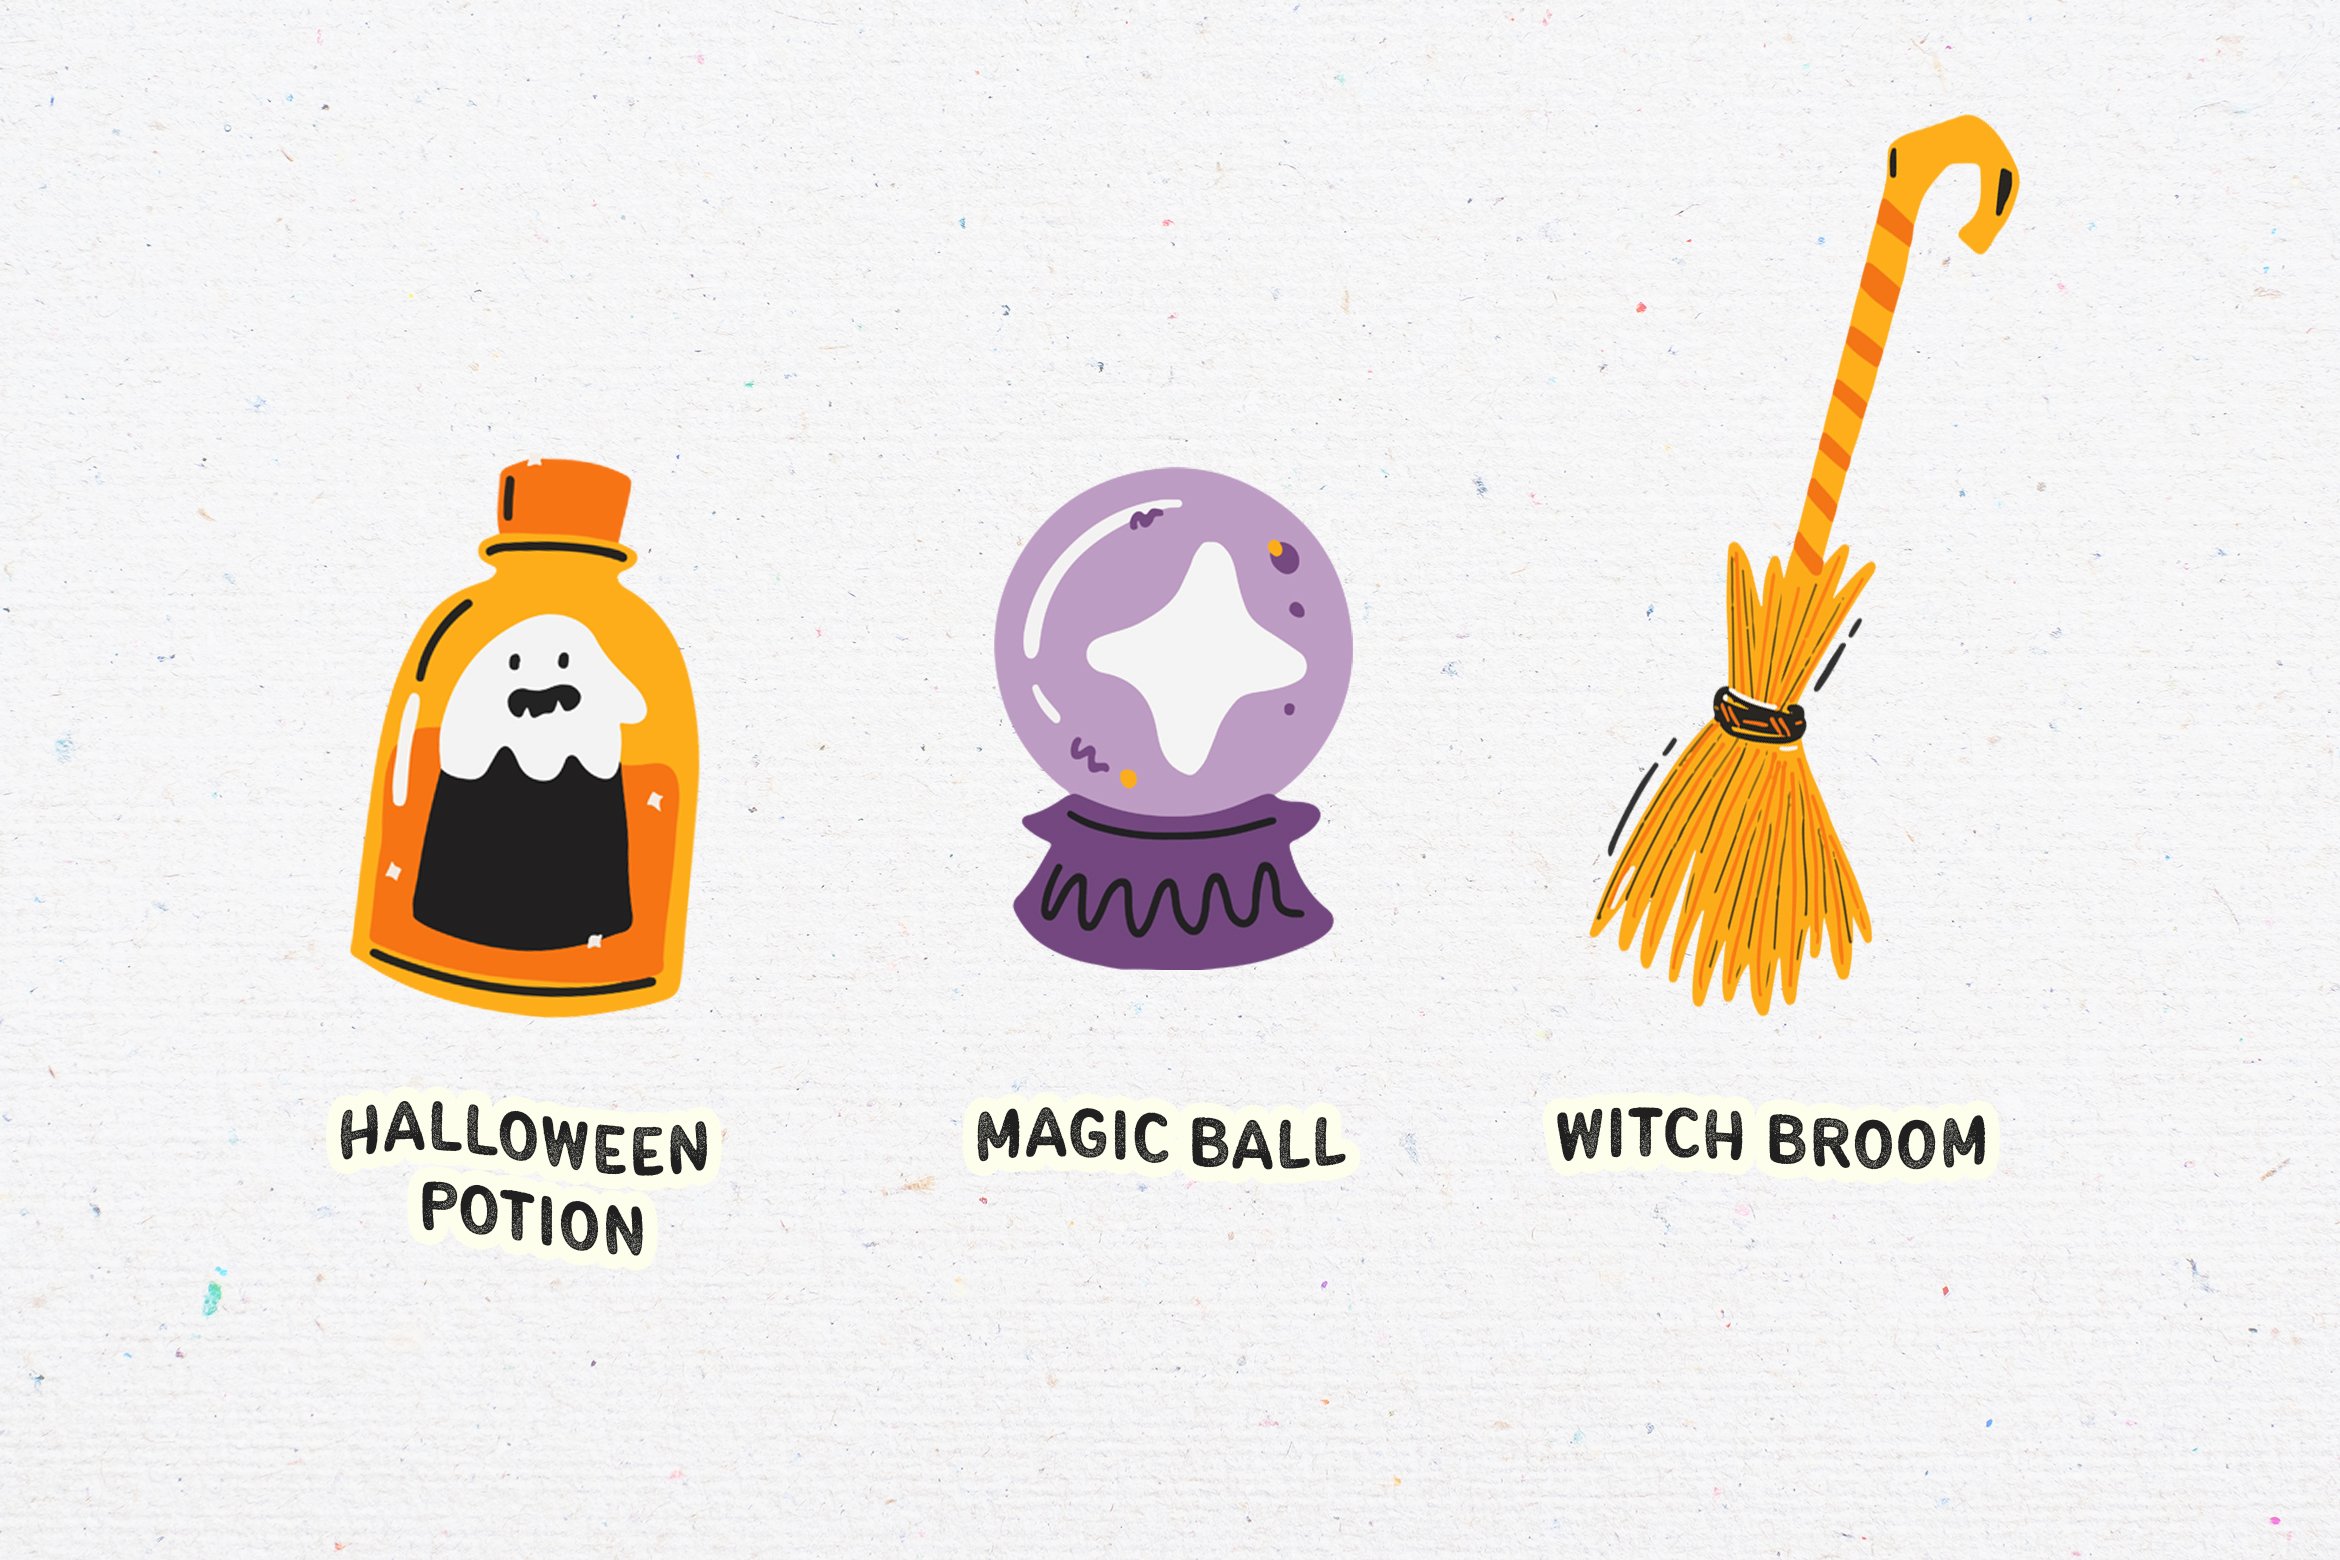 Watercolor Halloween items for you.